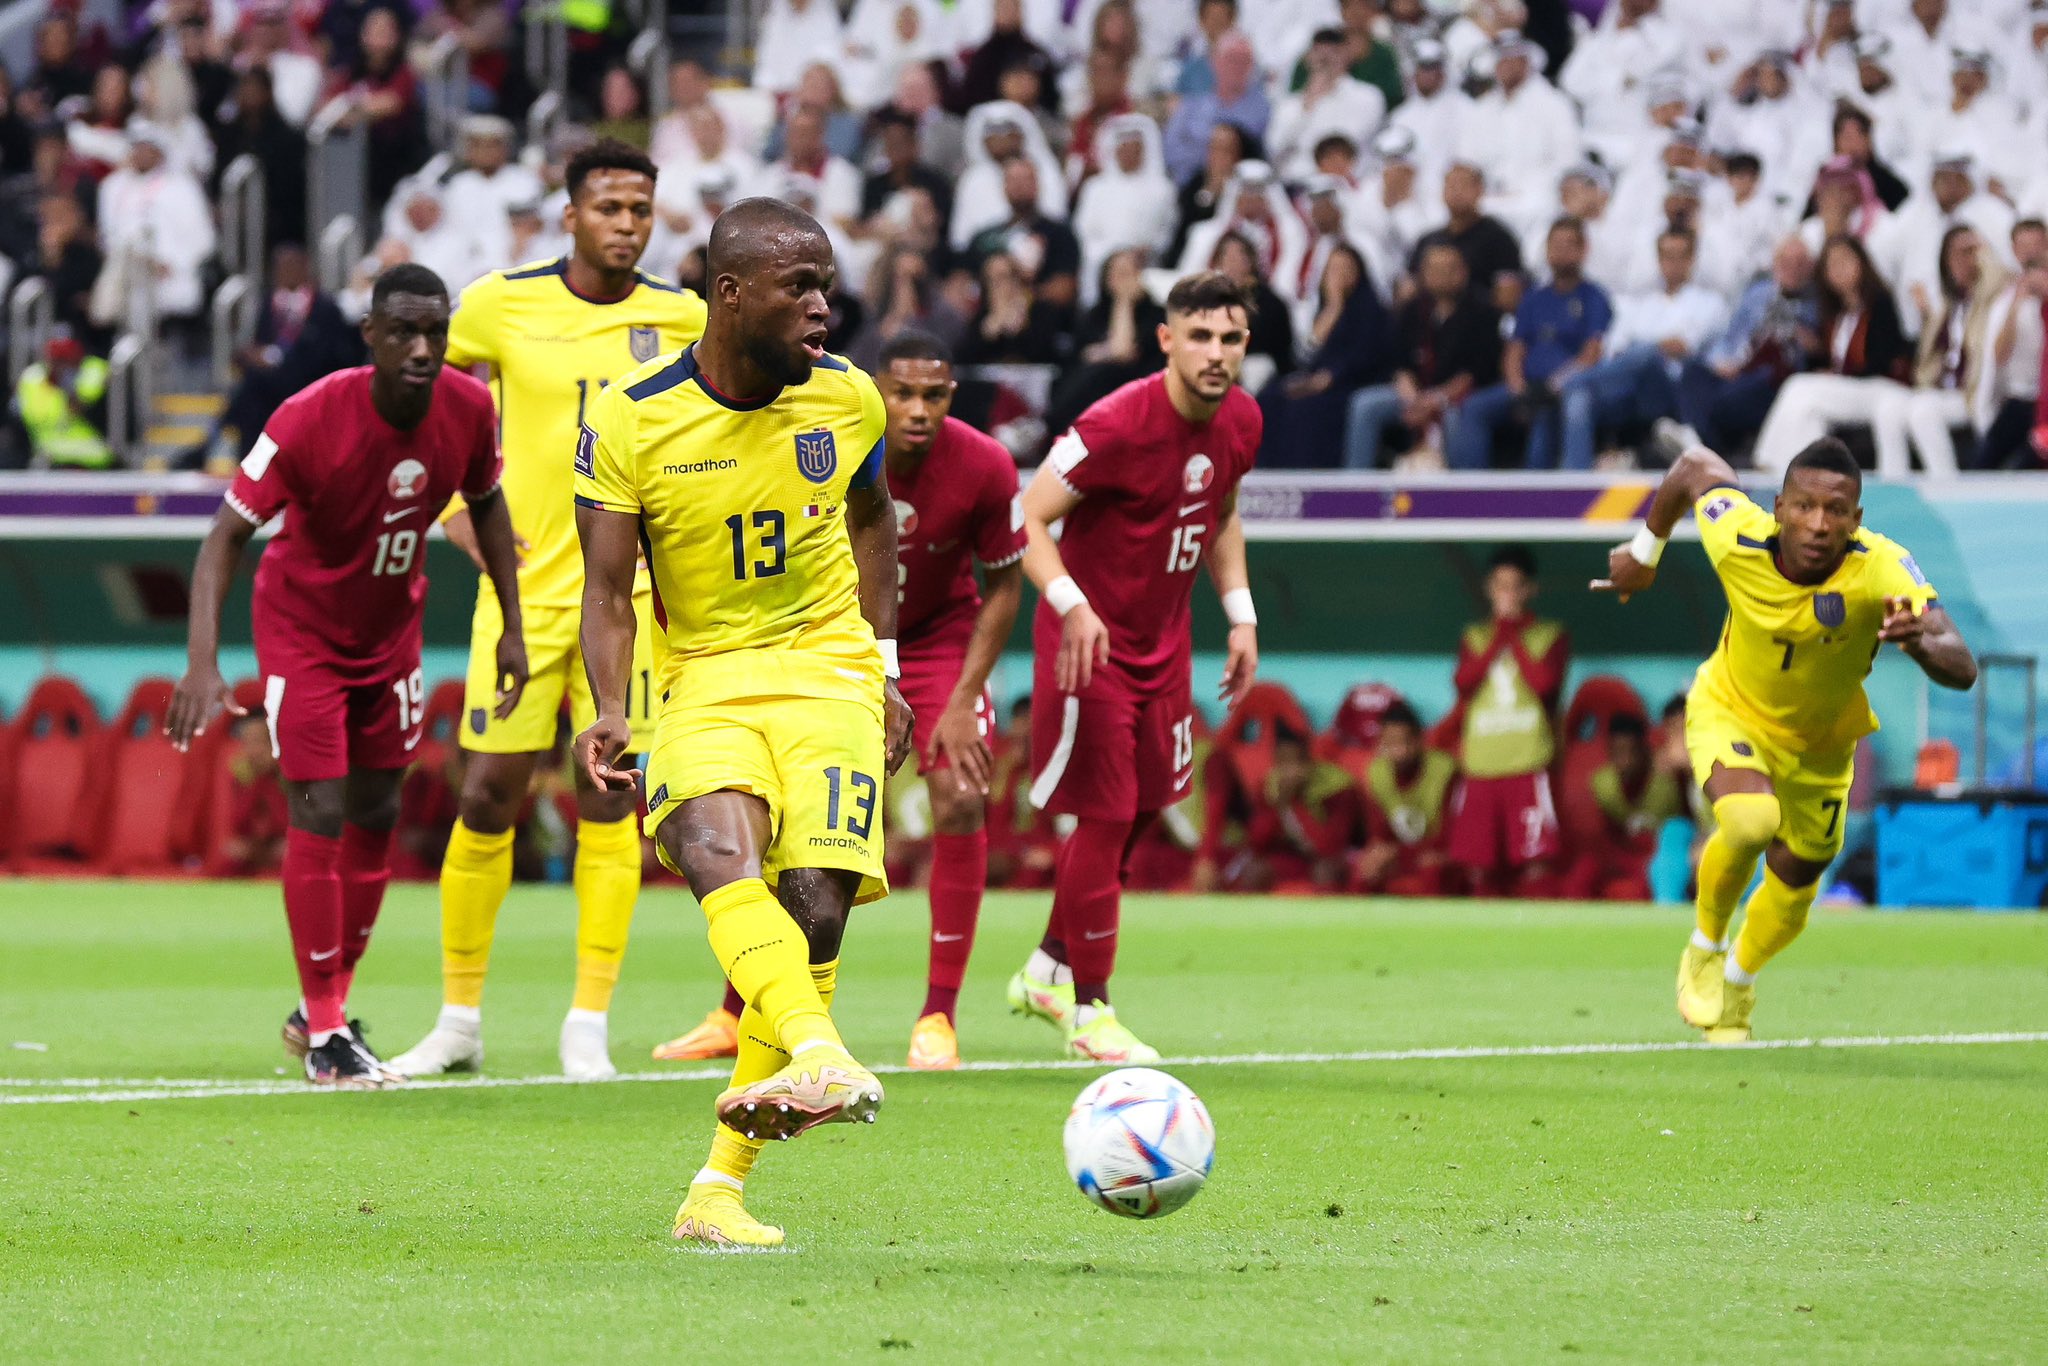 The Ecuadorian team beat Qatar in the opening match of the World Cup.  Image: @LaTri.